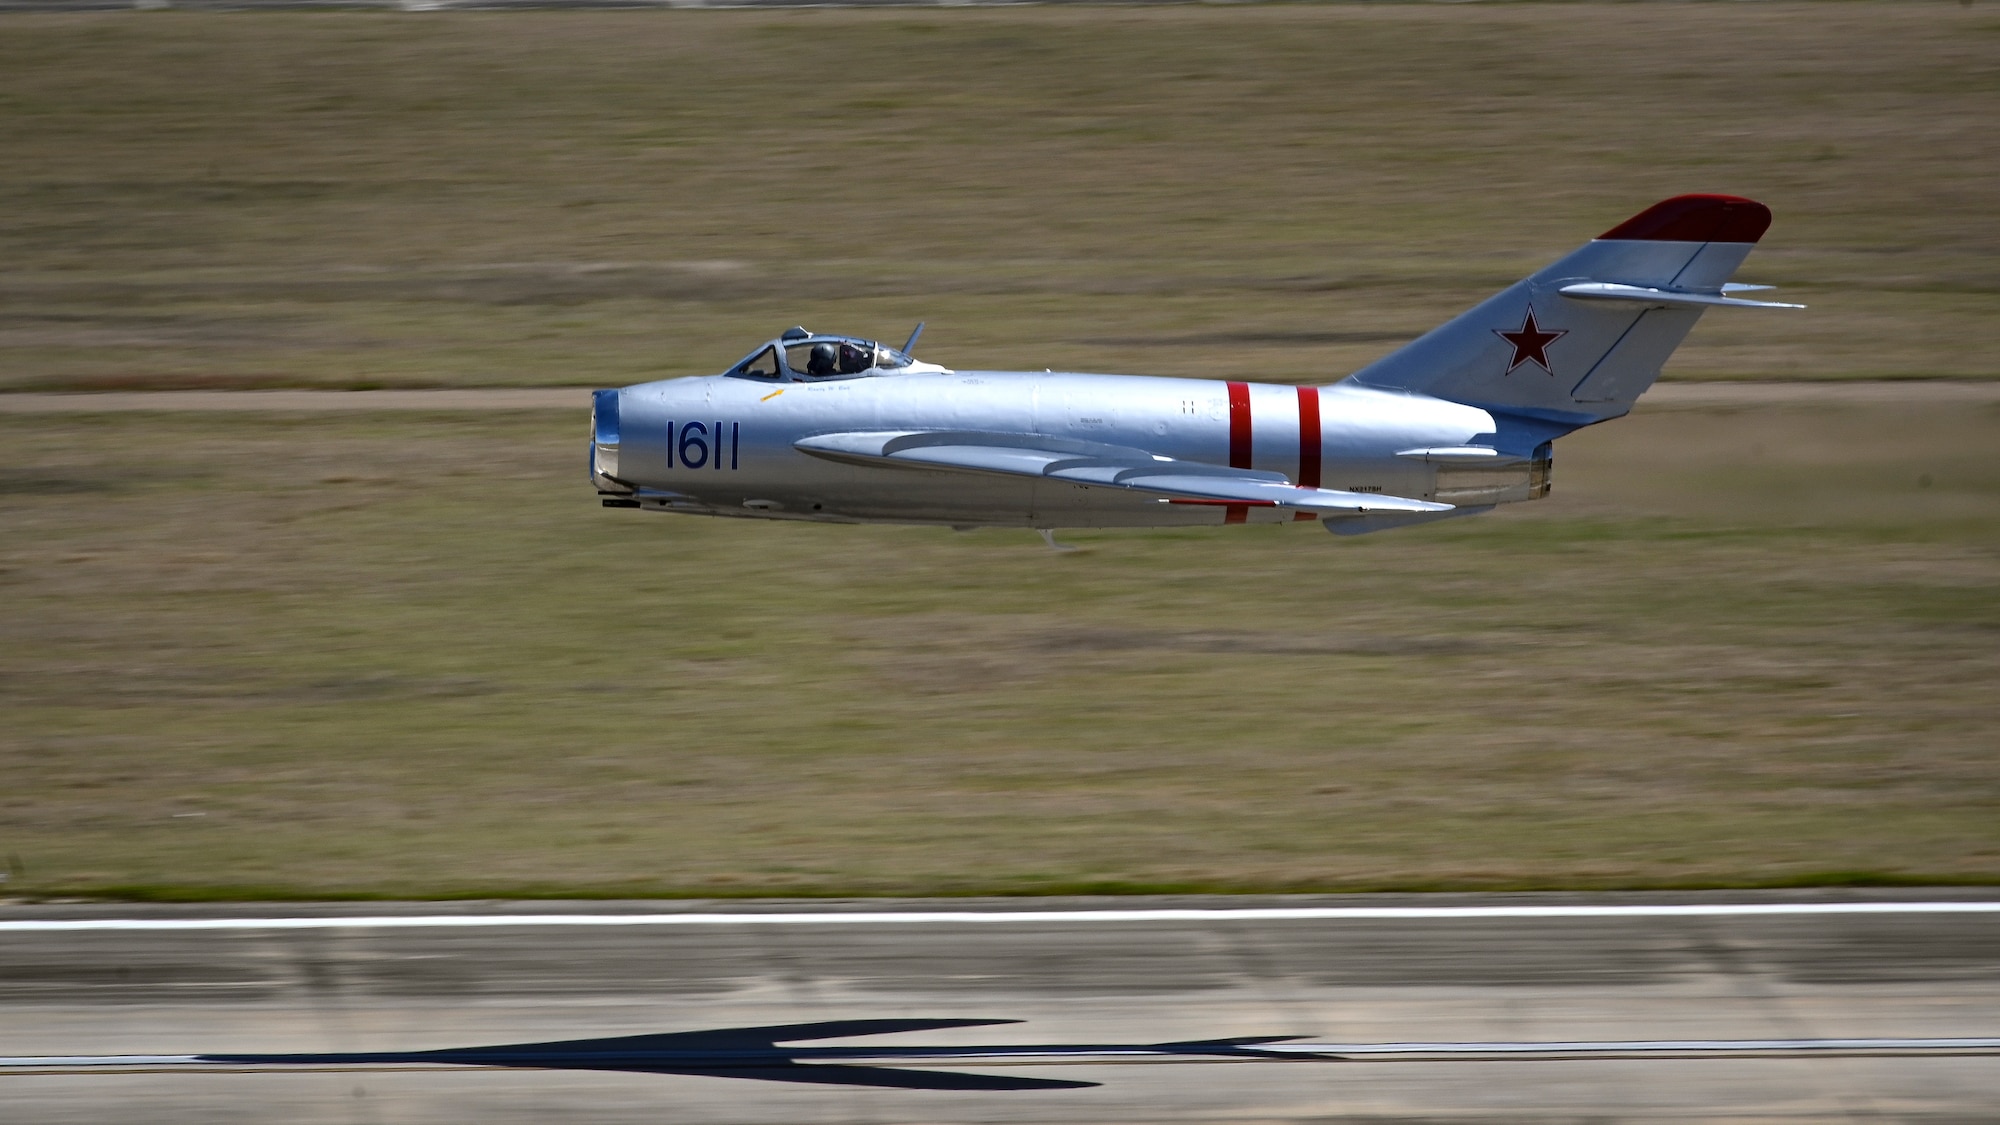 Randy Ball, an air demonstration pilot for the MIG-17, practices his act in preparation for the Shaw Air & Space Expo at Shaw Air Force Base, South Carolina, April 1, 2022. Participation in air shows allow the 20FW to showcase their capabilities to the public, while simultaneously building community relations. (U.S. Air Force photo by Senior Airman Madeline Herzog)